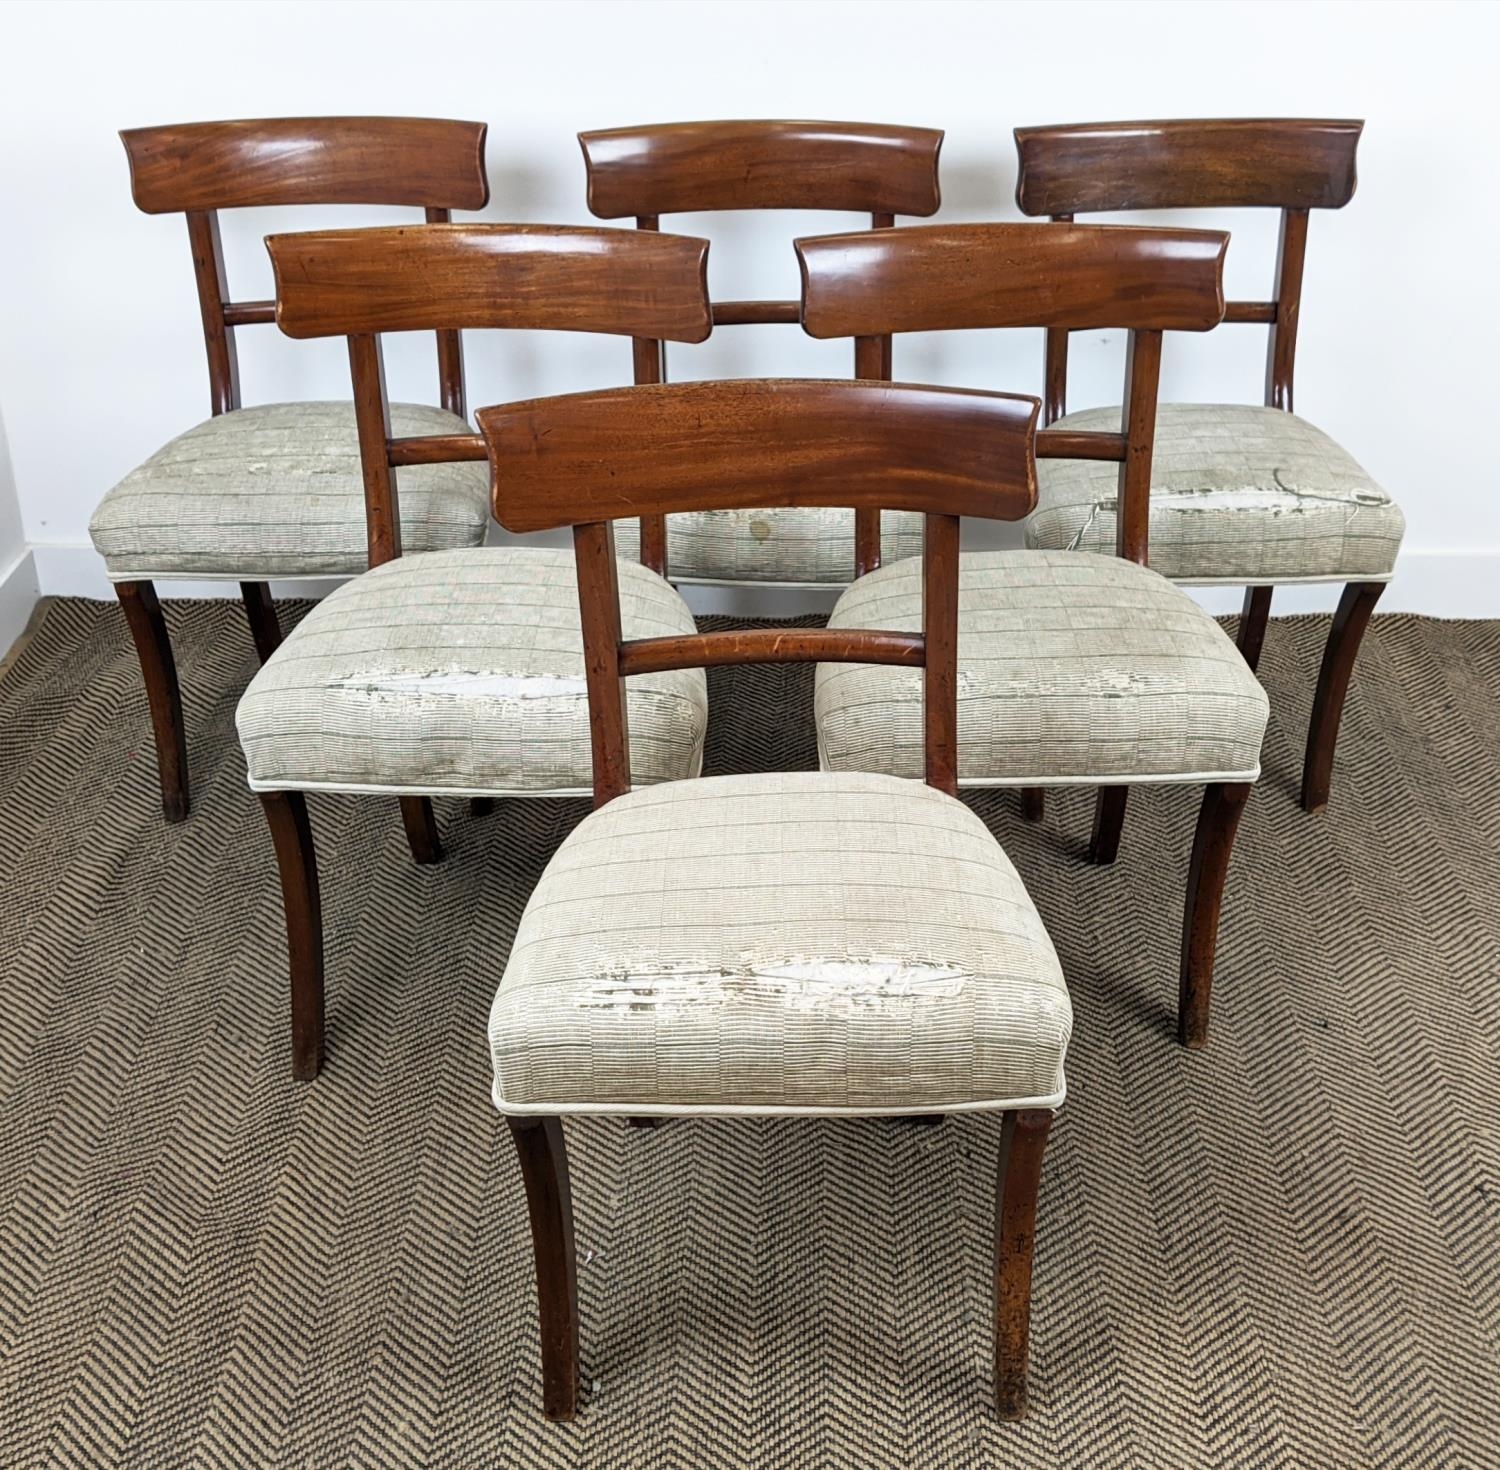 DINING CHAIRS, a set of six, circa 1830, mahogany with stuffover seats, 86cm H x 49cm x 48cm. (6) - Image 3 of 16